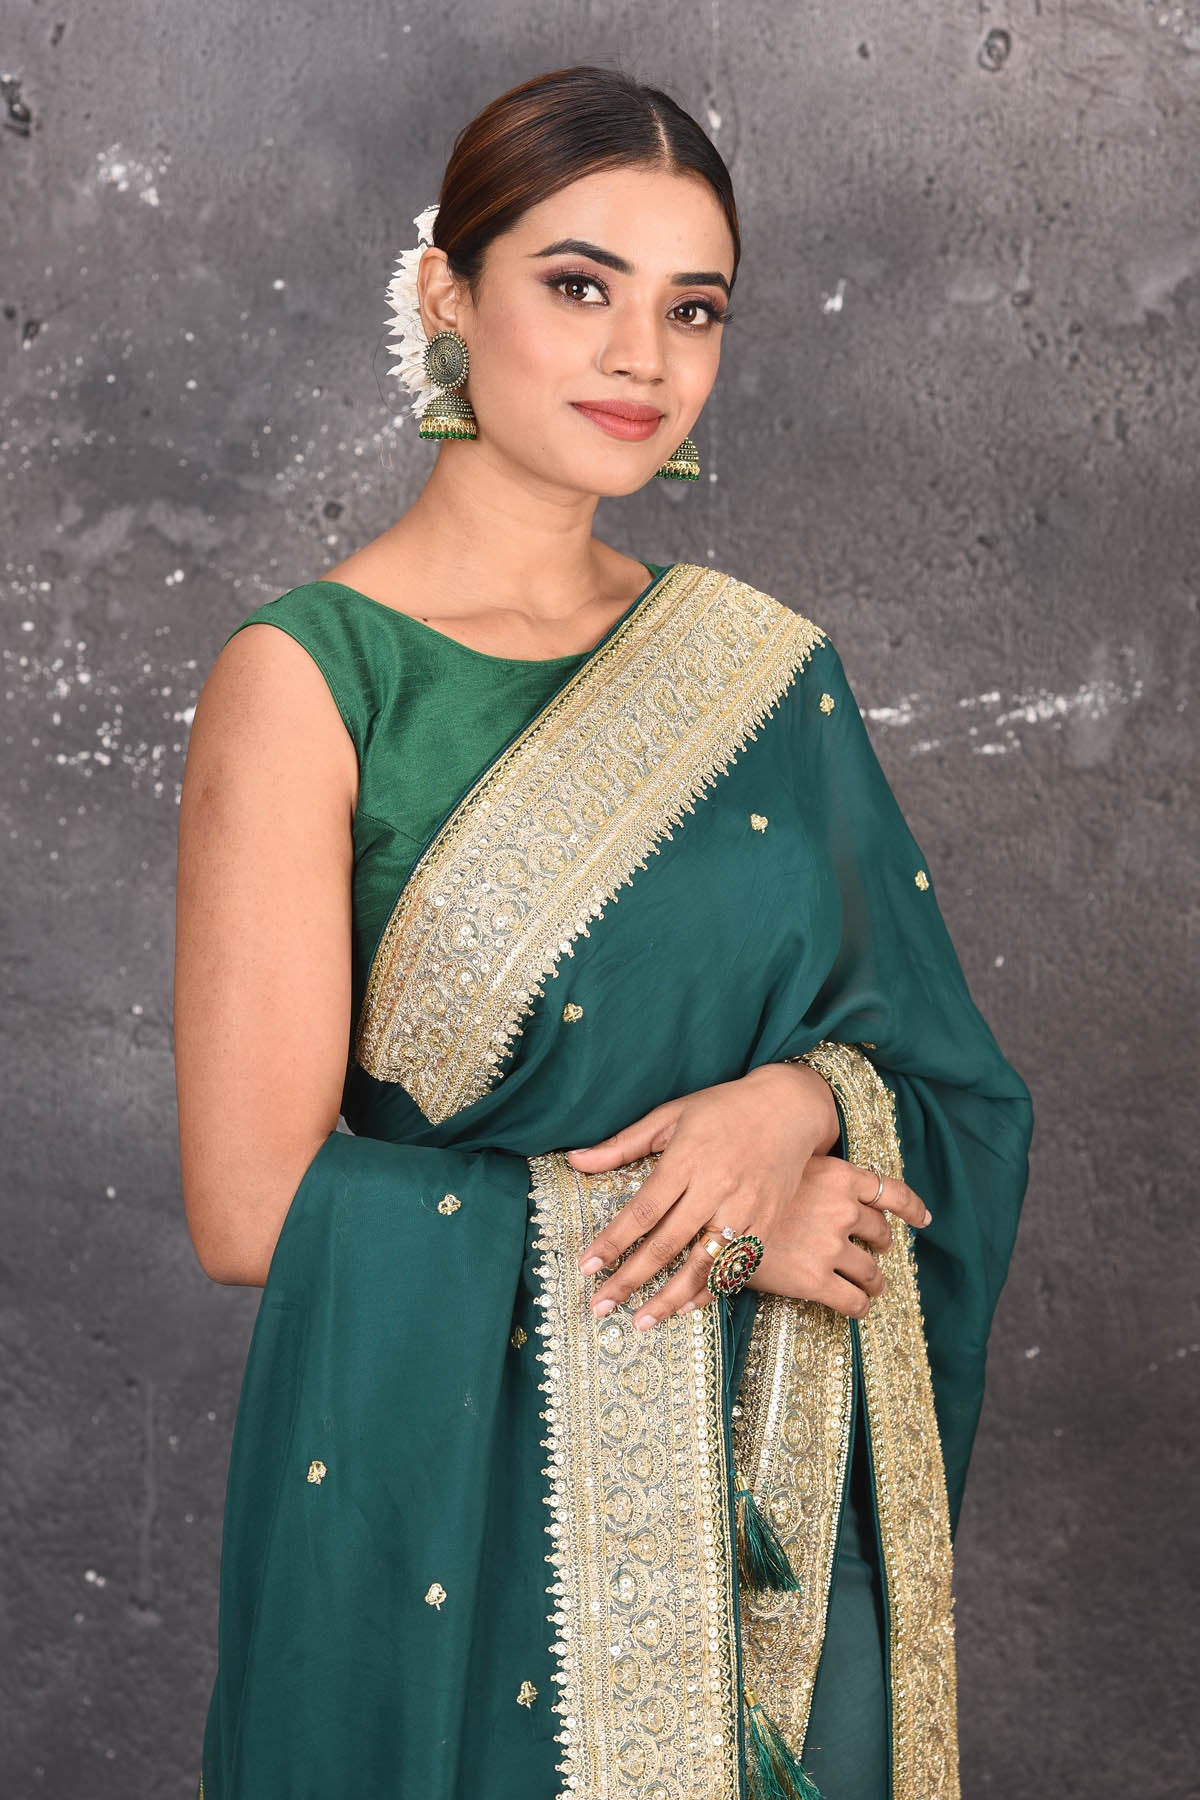 Buy exquisite pine green georgette banarasi designer saree with golden heavy Border online in USA which has crafted by skilled weaver of Banaras with elegance and grace, this saree is definitely the epitome of beauty and a must have in your collection. Buy designer handwoven banarasi georgette sari with any blouse from Pure Elegance Indian saree store in USA.-Close up.